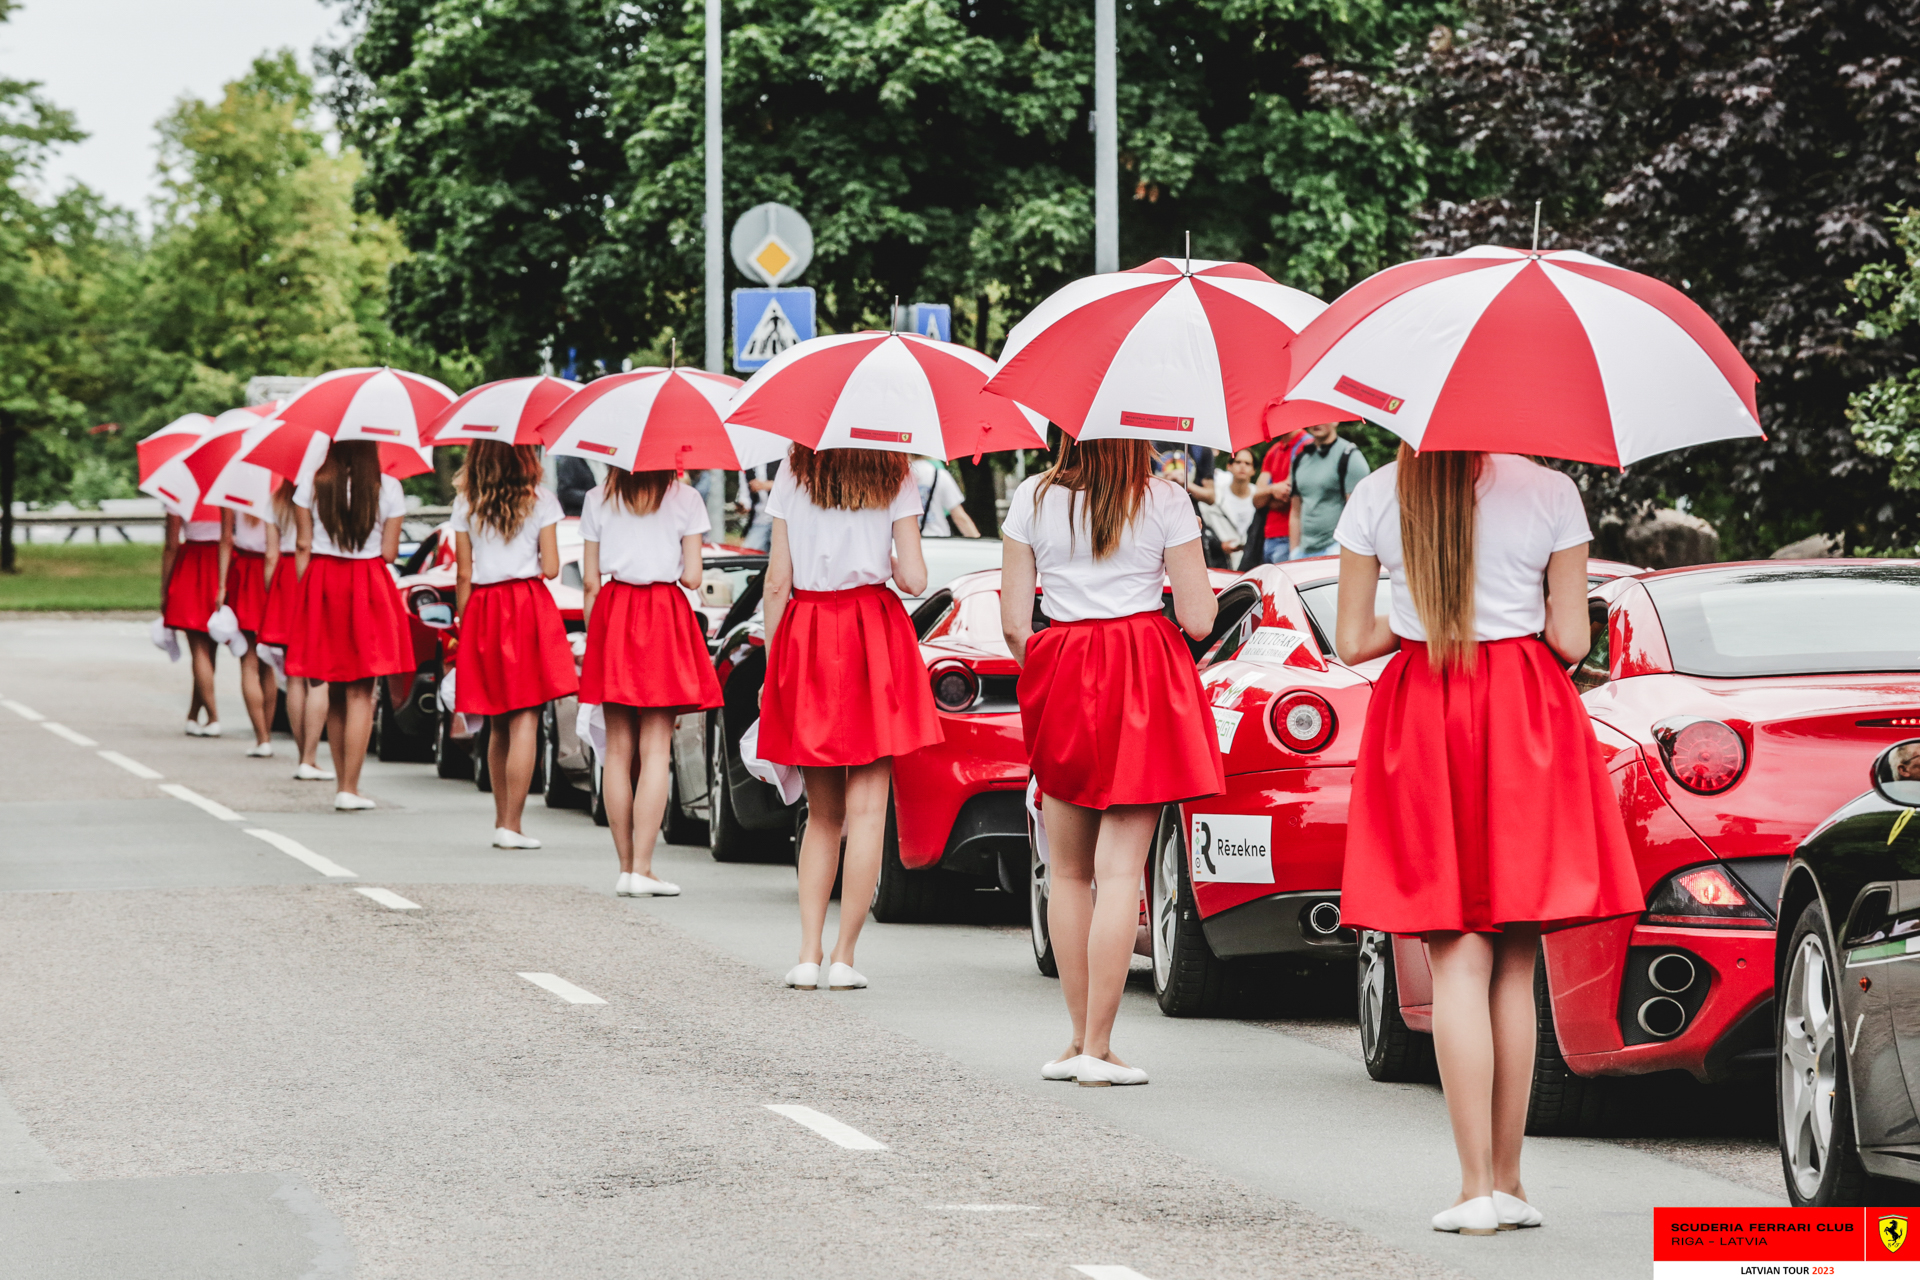 The start of the Riga car parade with SFC Riga grid girls. 